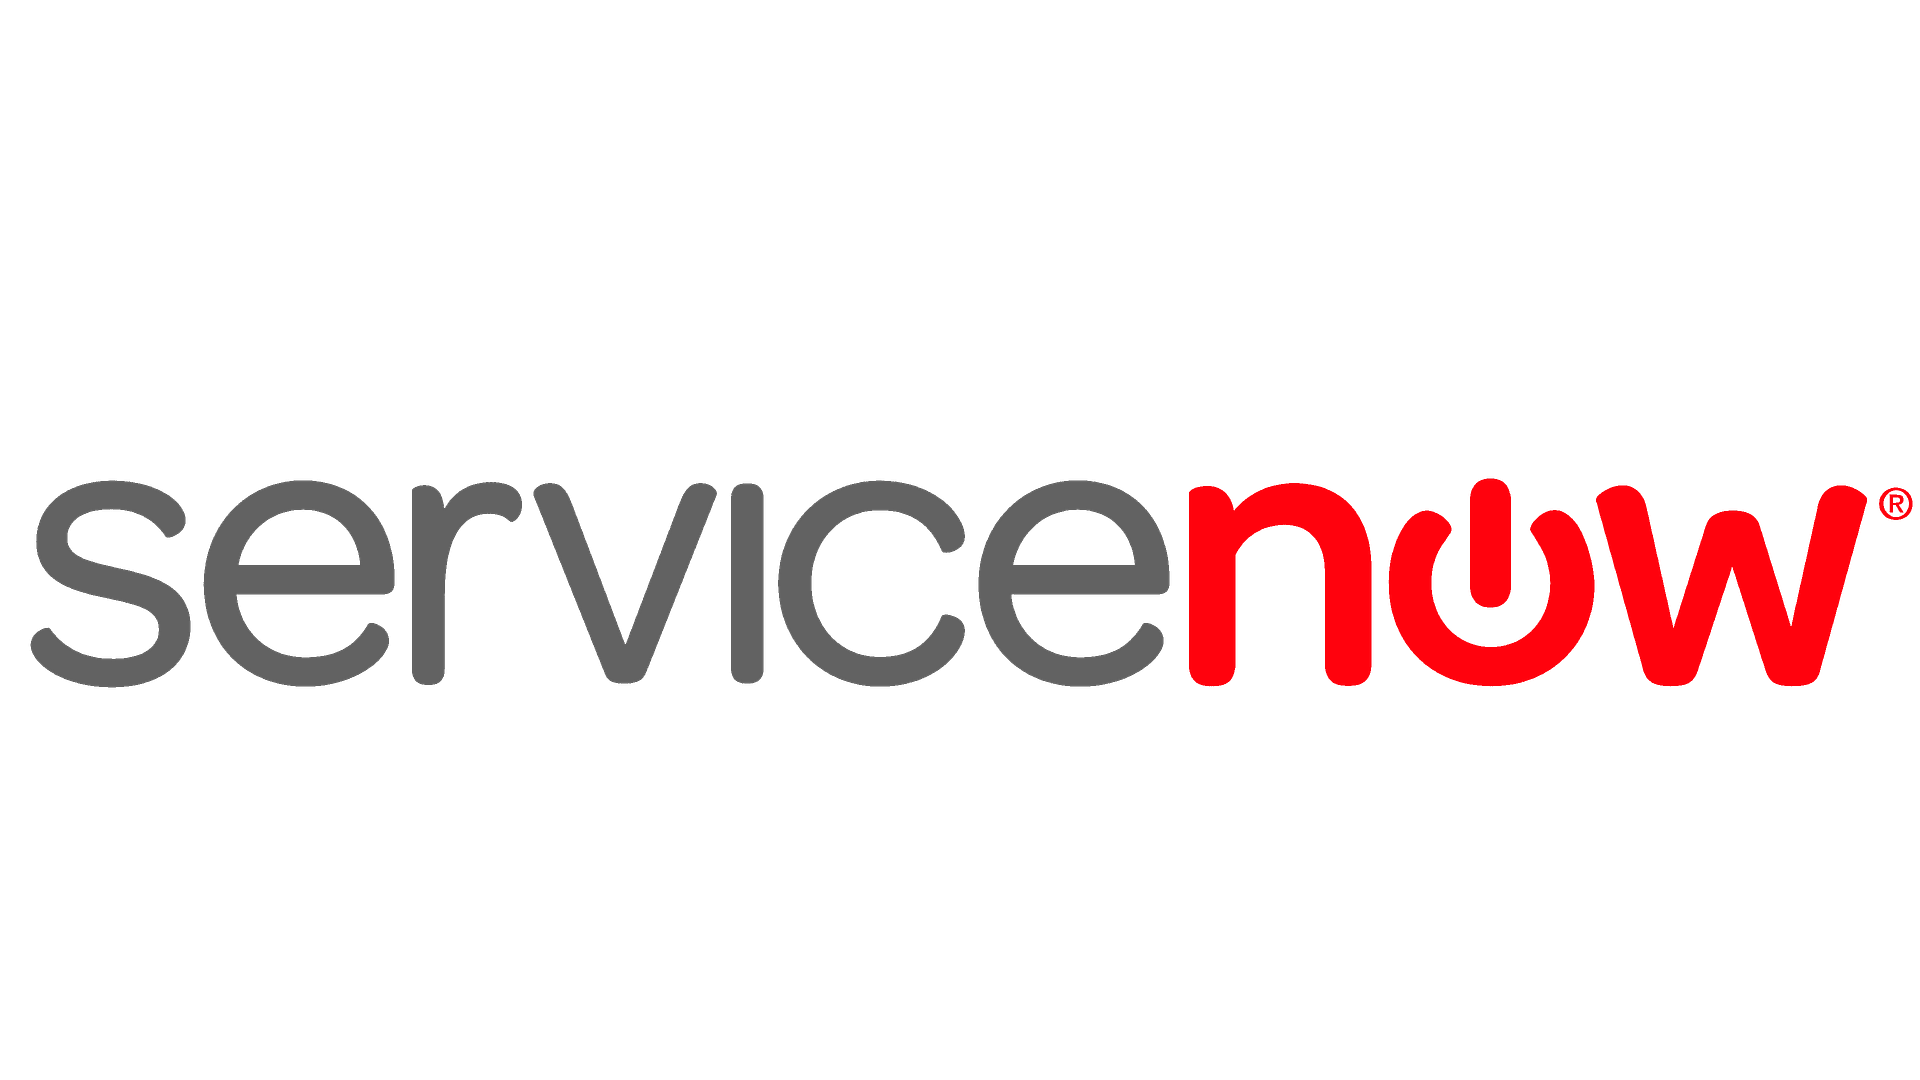 ServiceNow is an American software company based in Santa Clara, California that develops a cloud computing platform to help companies manage digital workflows for enterprise operations.